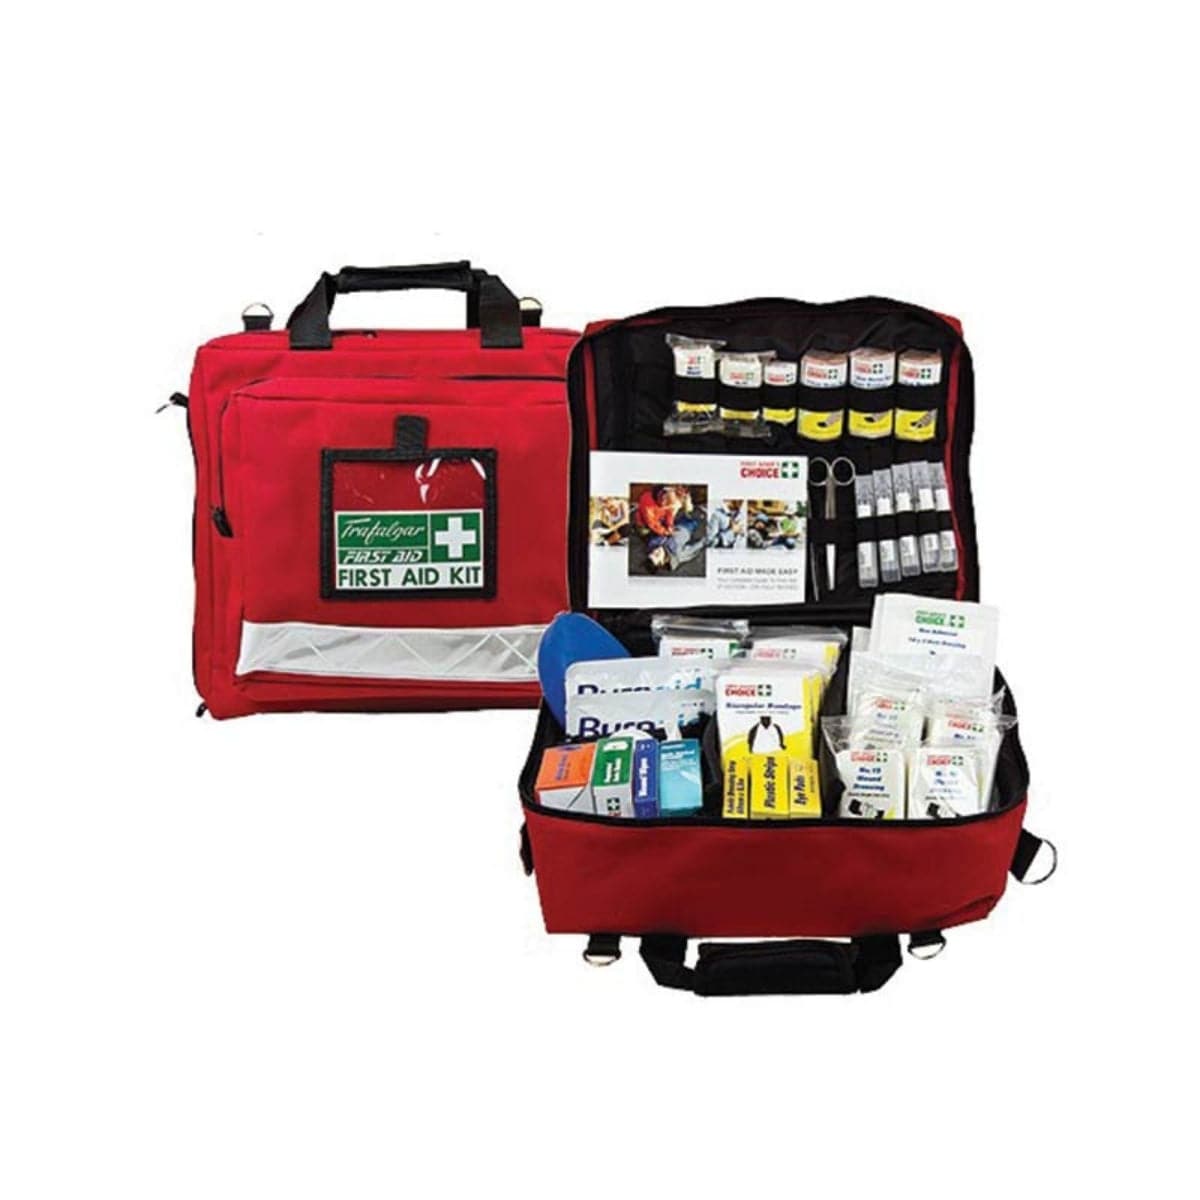 Electrical Trades First Aid Kit (Soft Case)